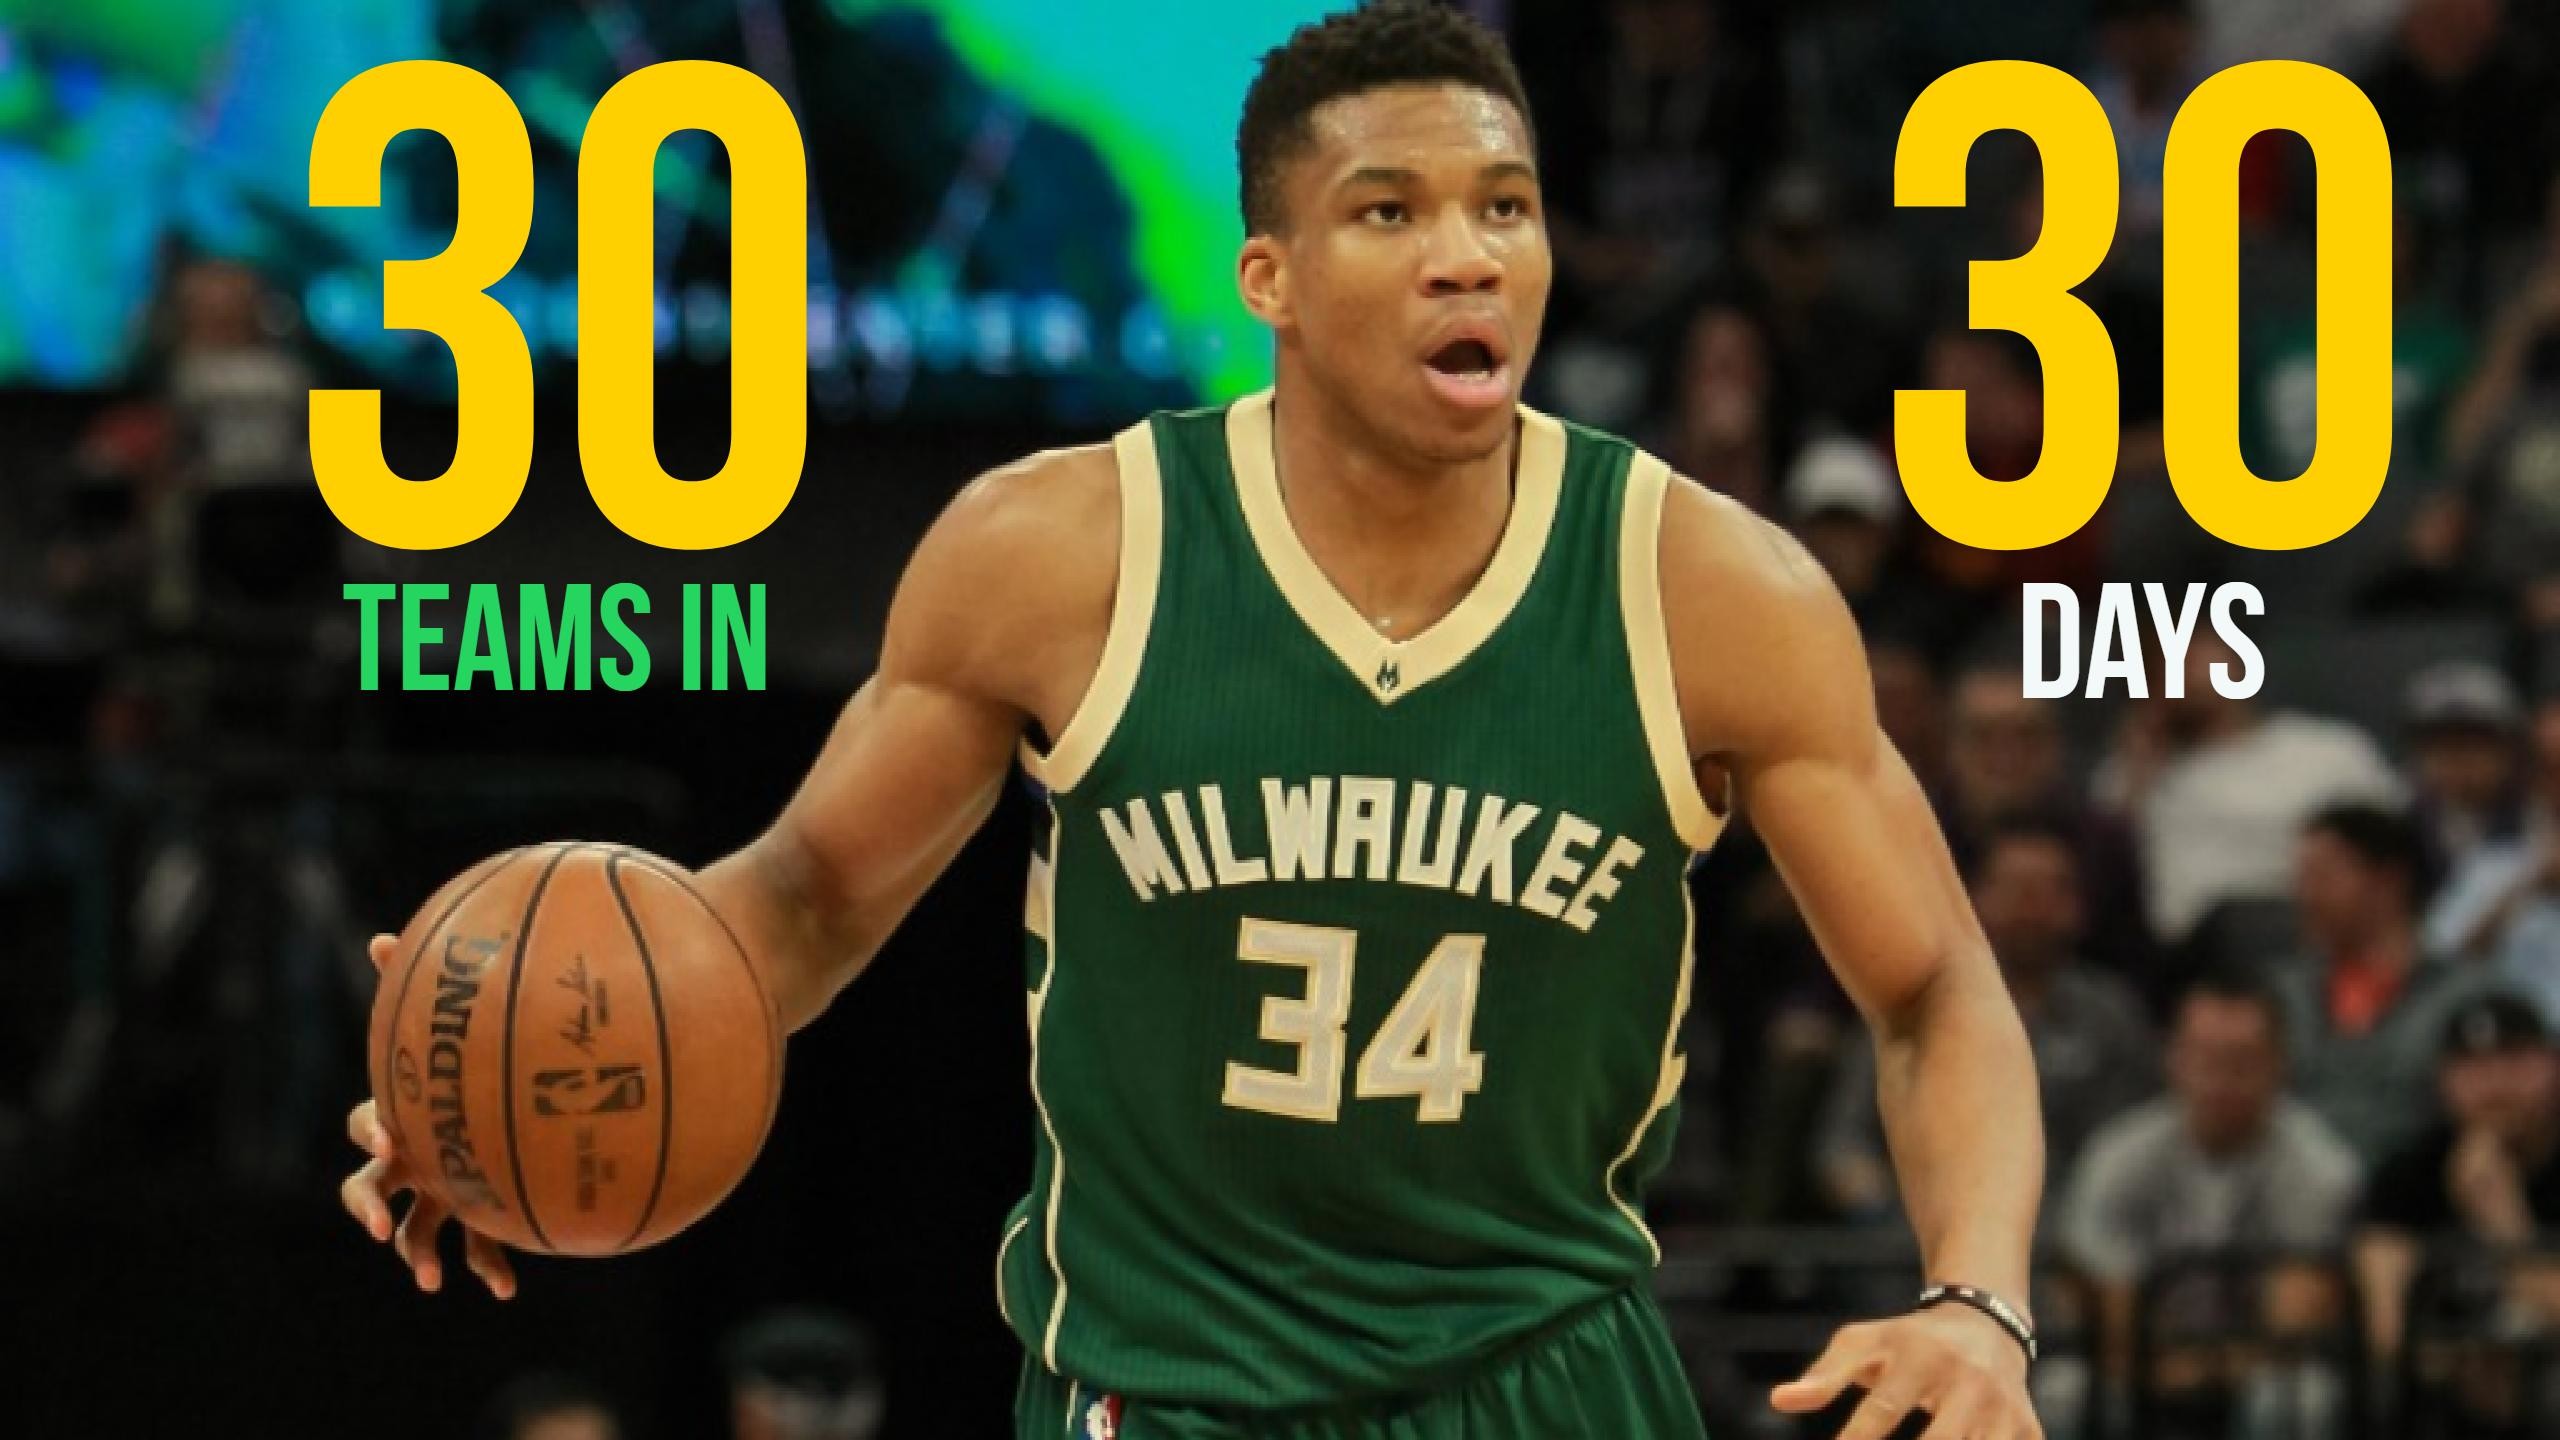 2560x1440 30 teams in 30 days: No Freak accident - Milwaukee Bucks could surprise